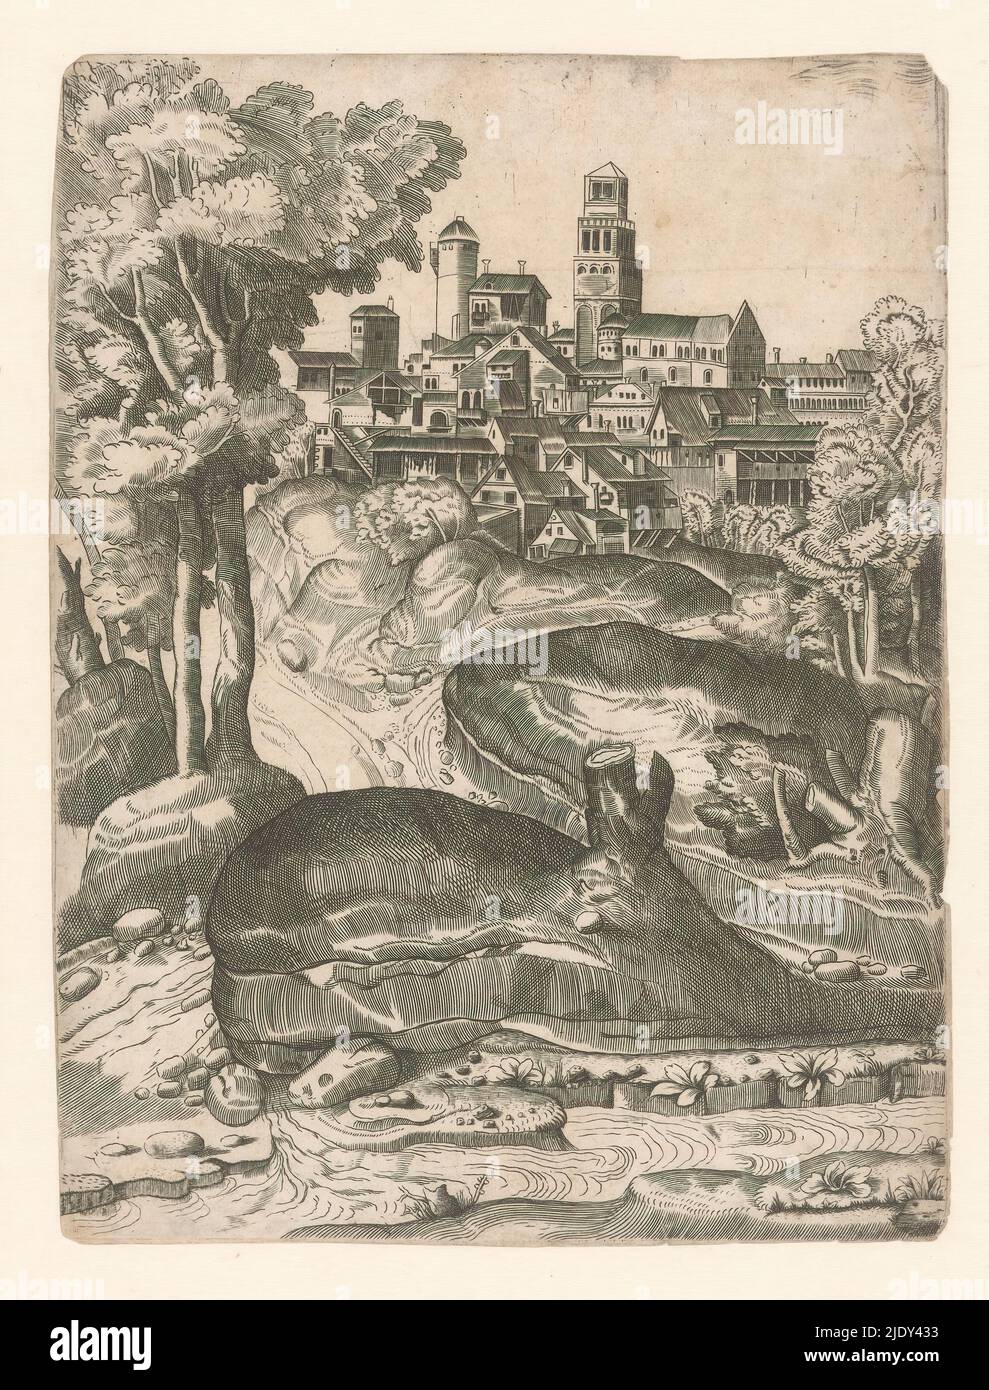 Landscape with a river and a city on a hill, Landscape with a river and a city on a hill., print maker: anonymous, after print by: Domenico Campagnola, after print by: Giulio Campagnola, Italy, c. 1530 - c. 1550, paper, engraving, etching, height 284 mm × width 214 mm Stock Photo